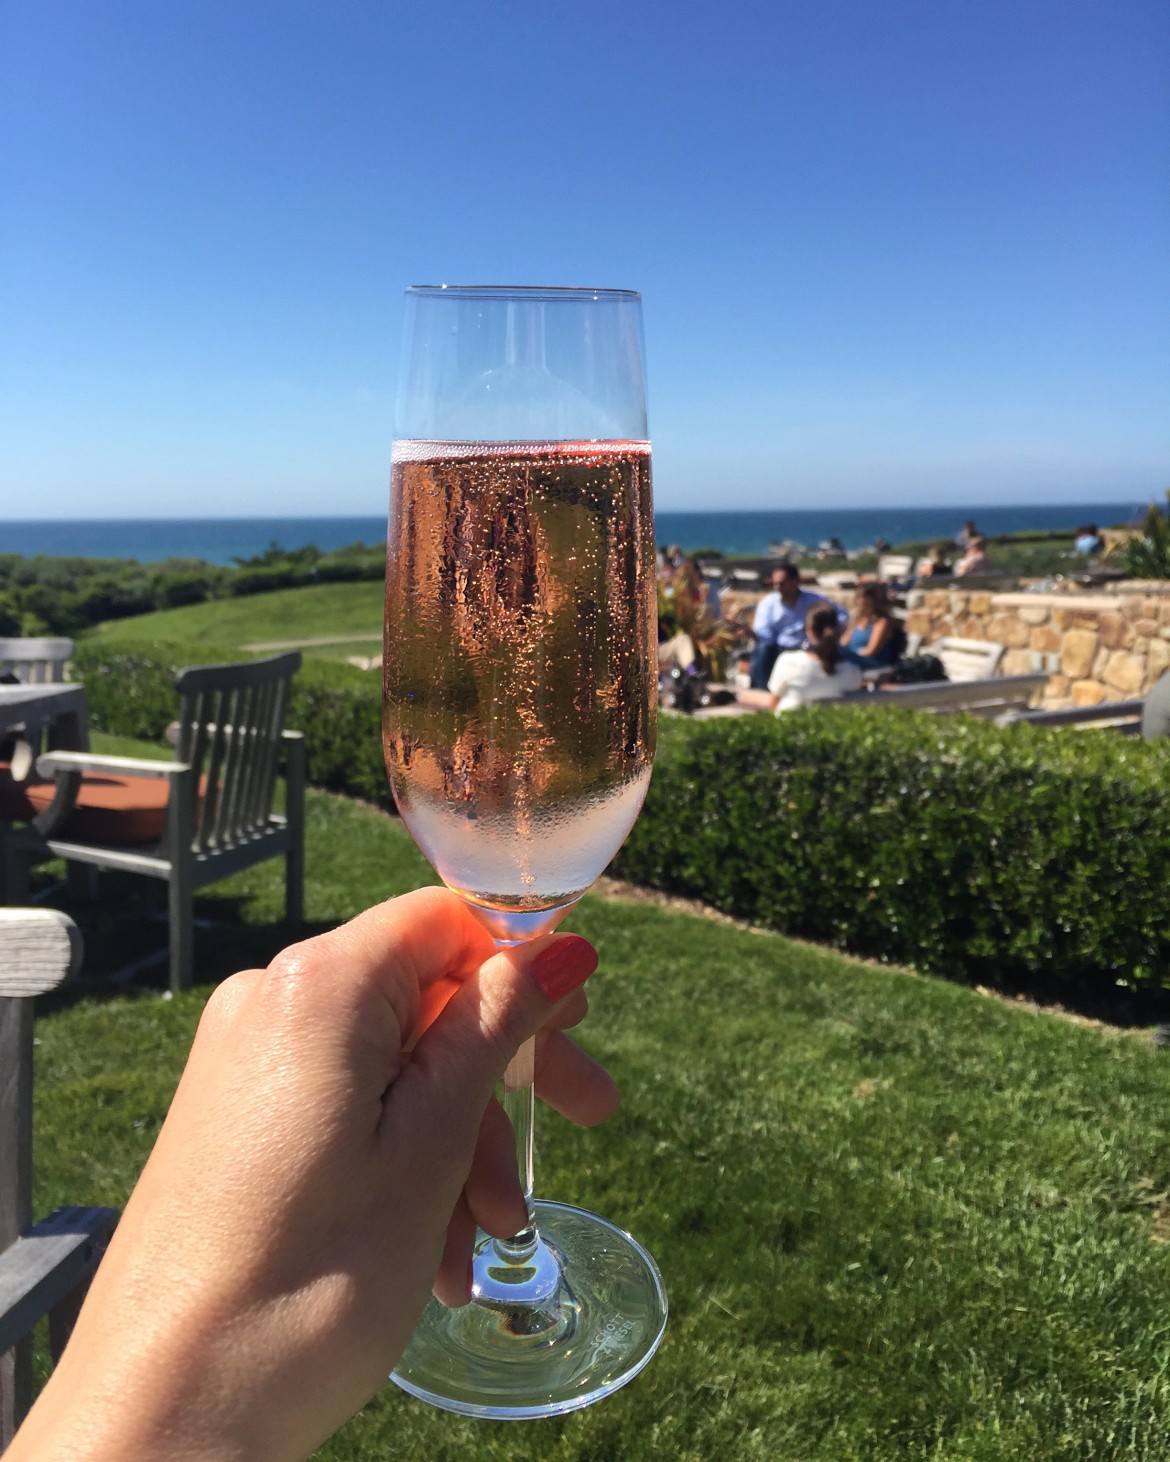 Top Reasons To Attend Pebble Beach Food & Wine